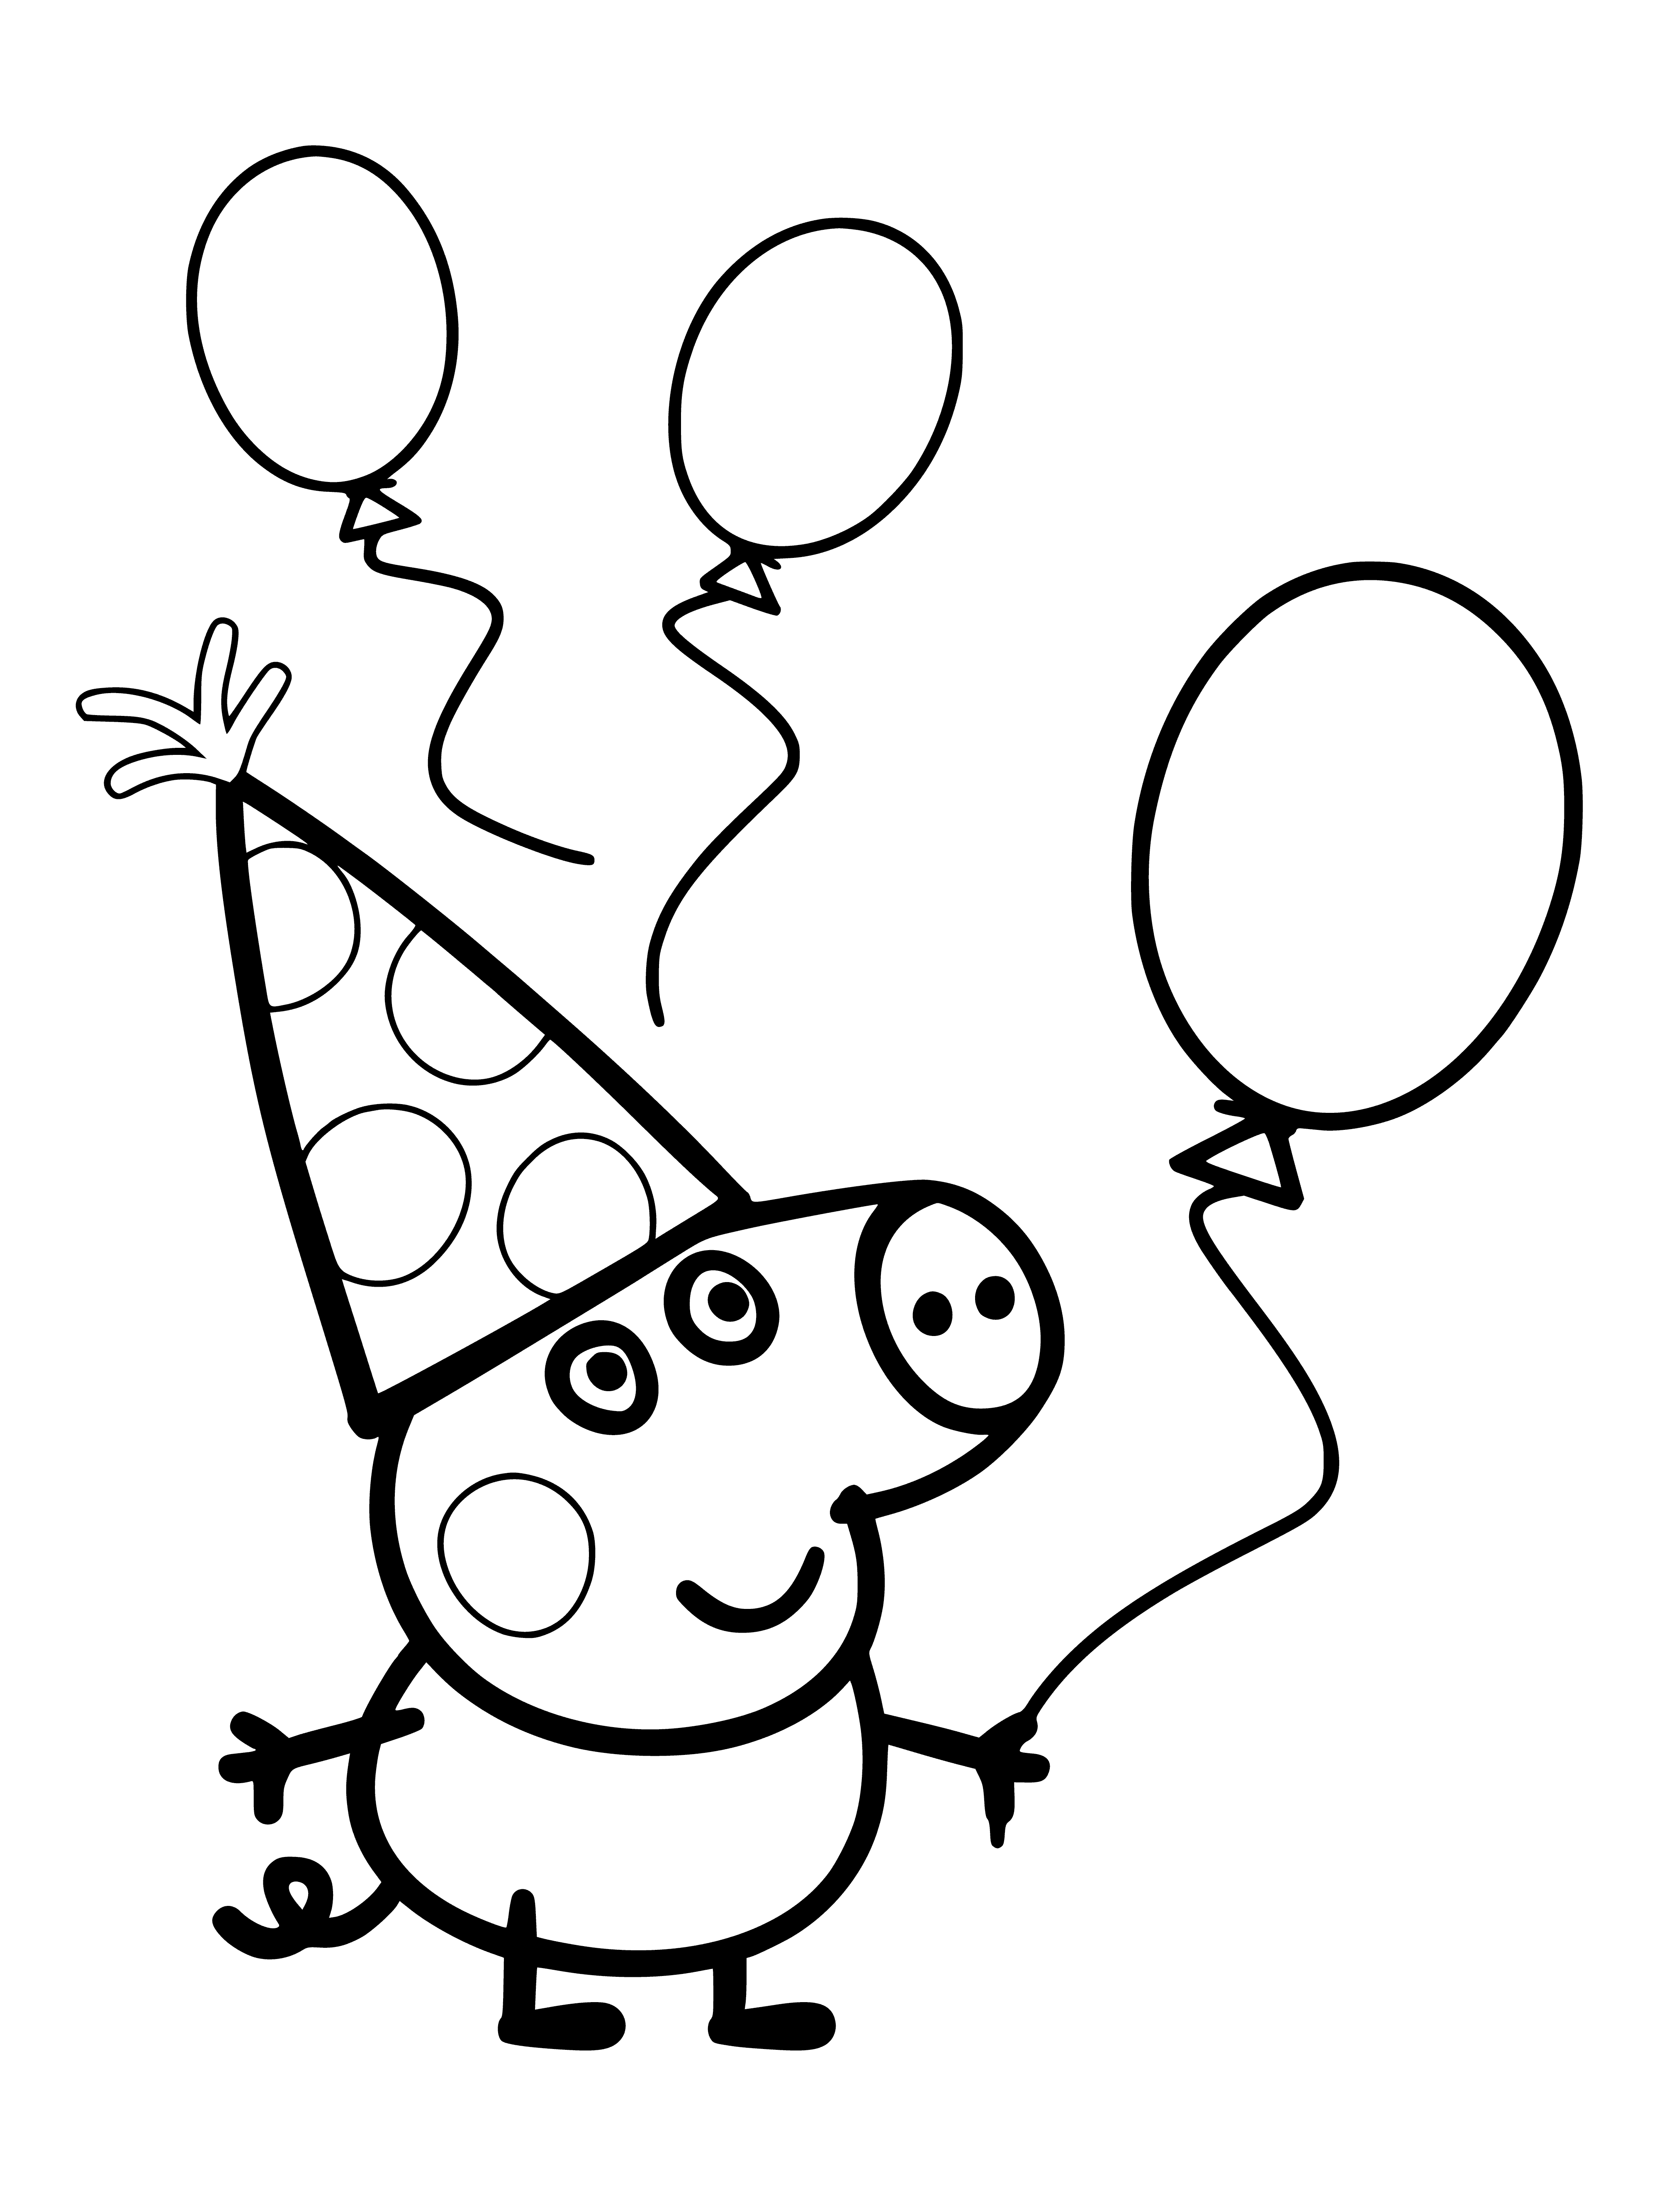 George at the party coloring page